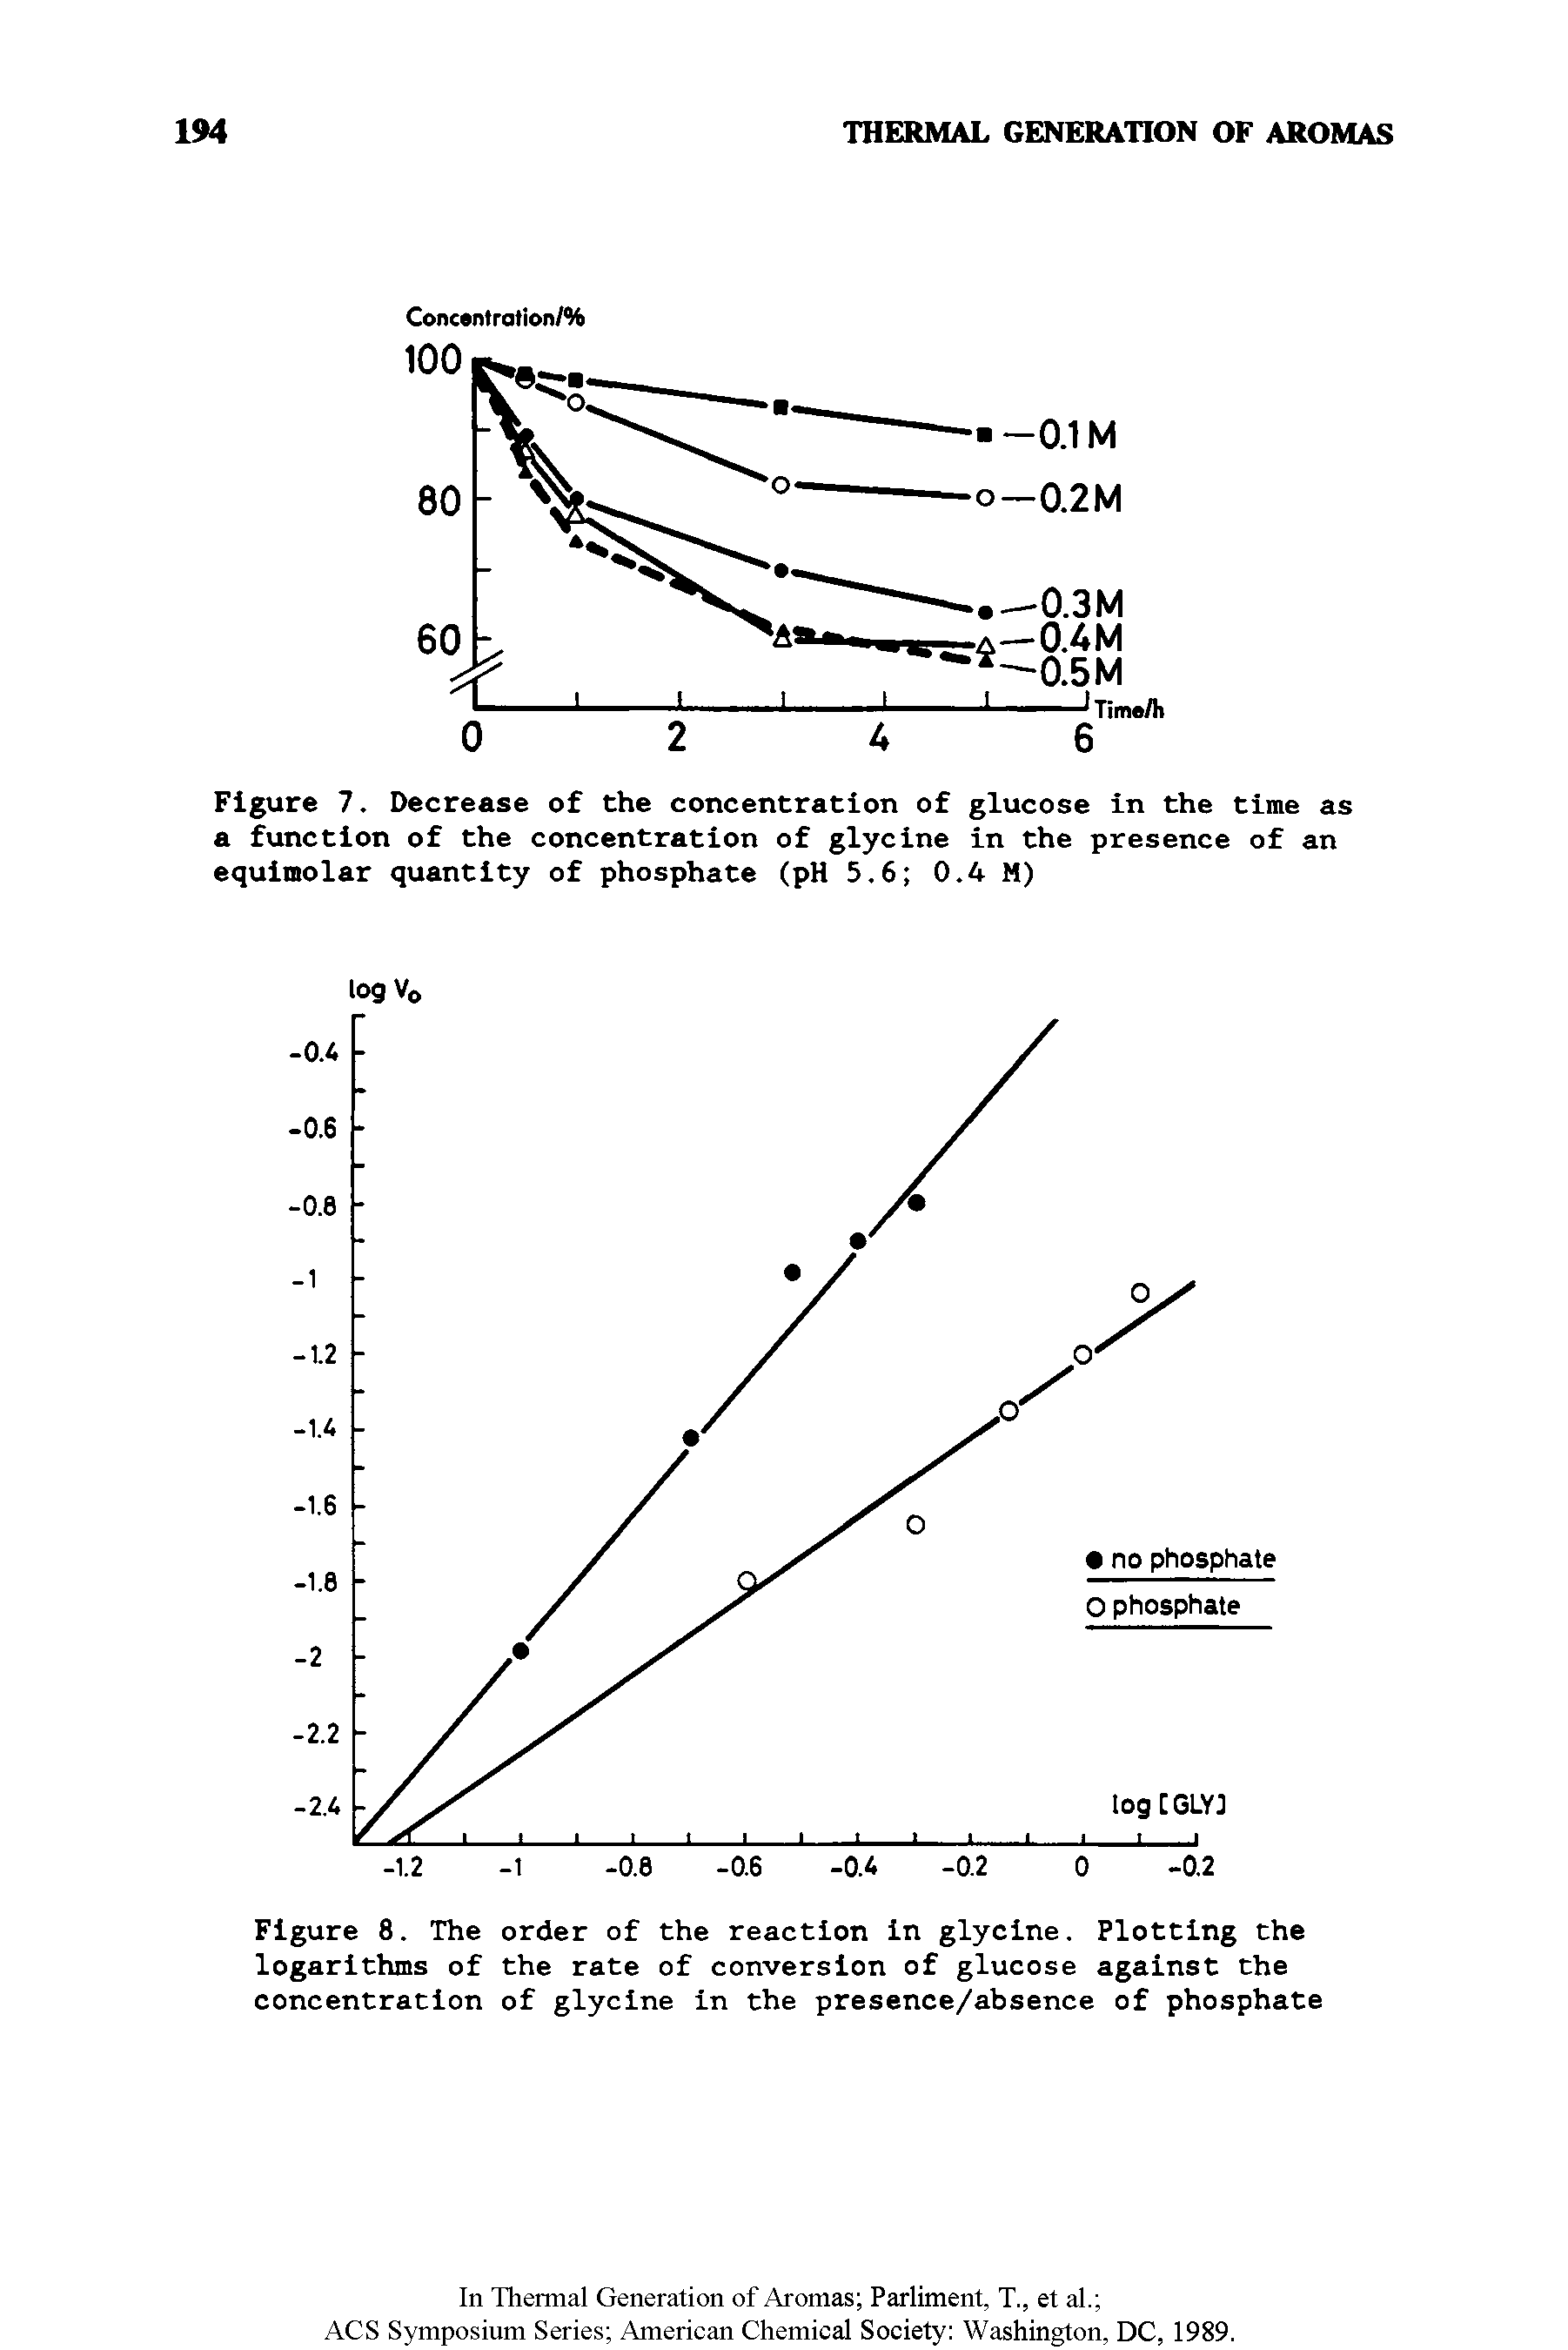 Figure 8. The order of the reaction in glycine. Plotting the logarithms of the rate of conversion of glucose against the concentration of glycine in the presence/absence of phosphate...